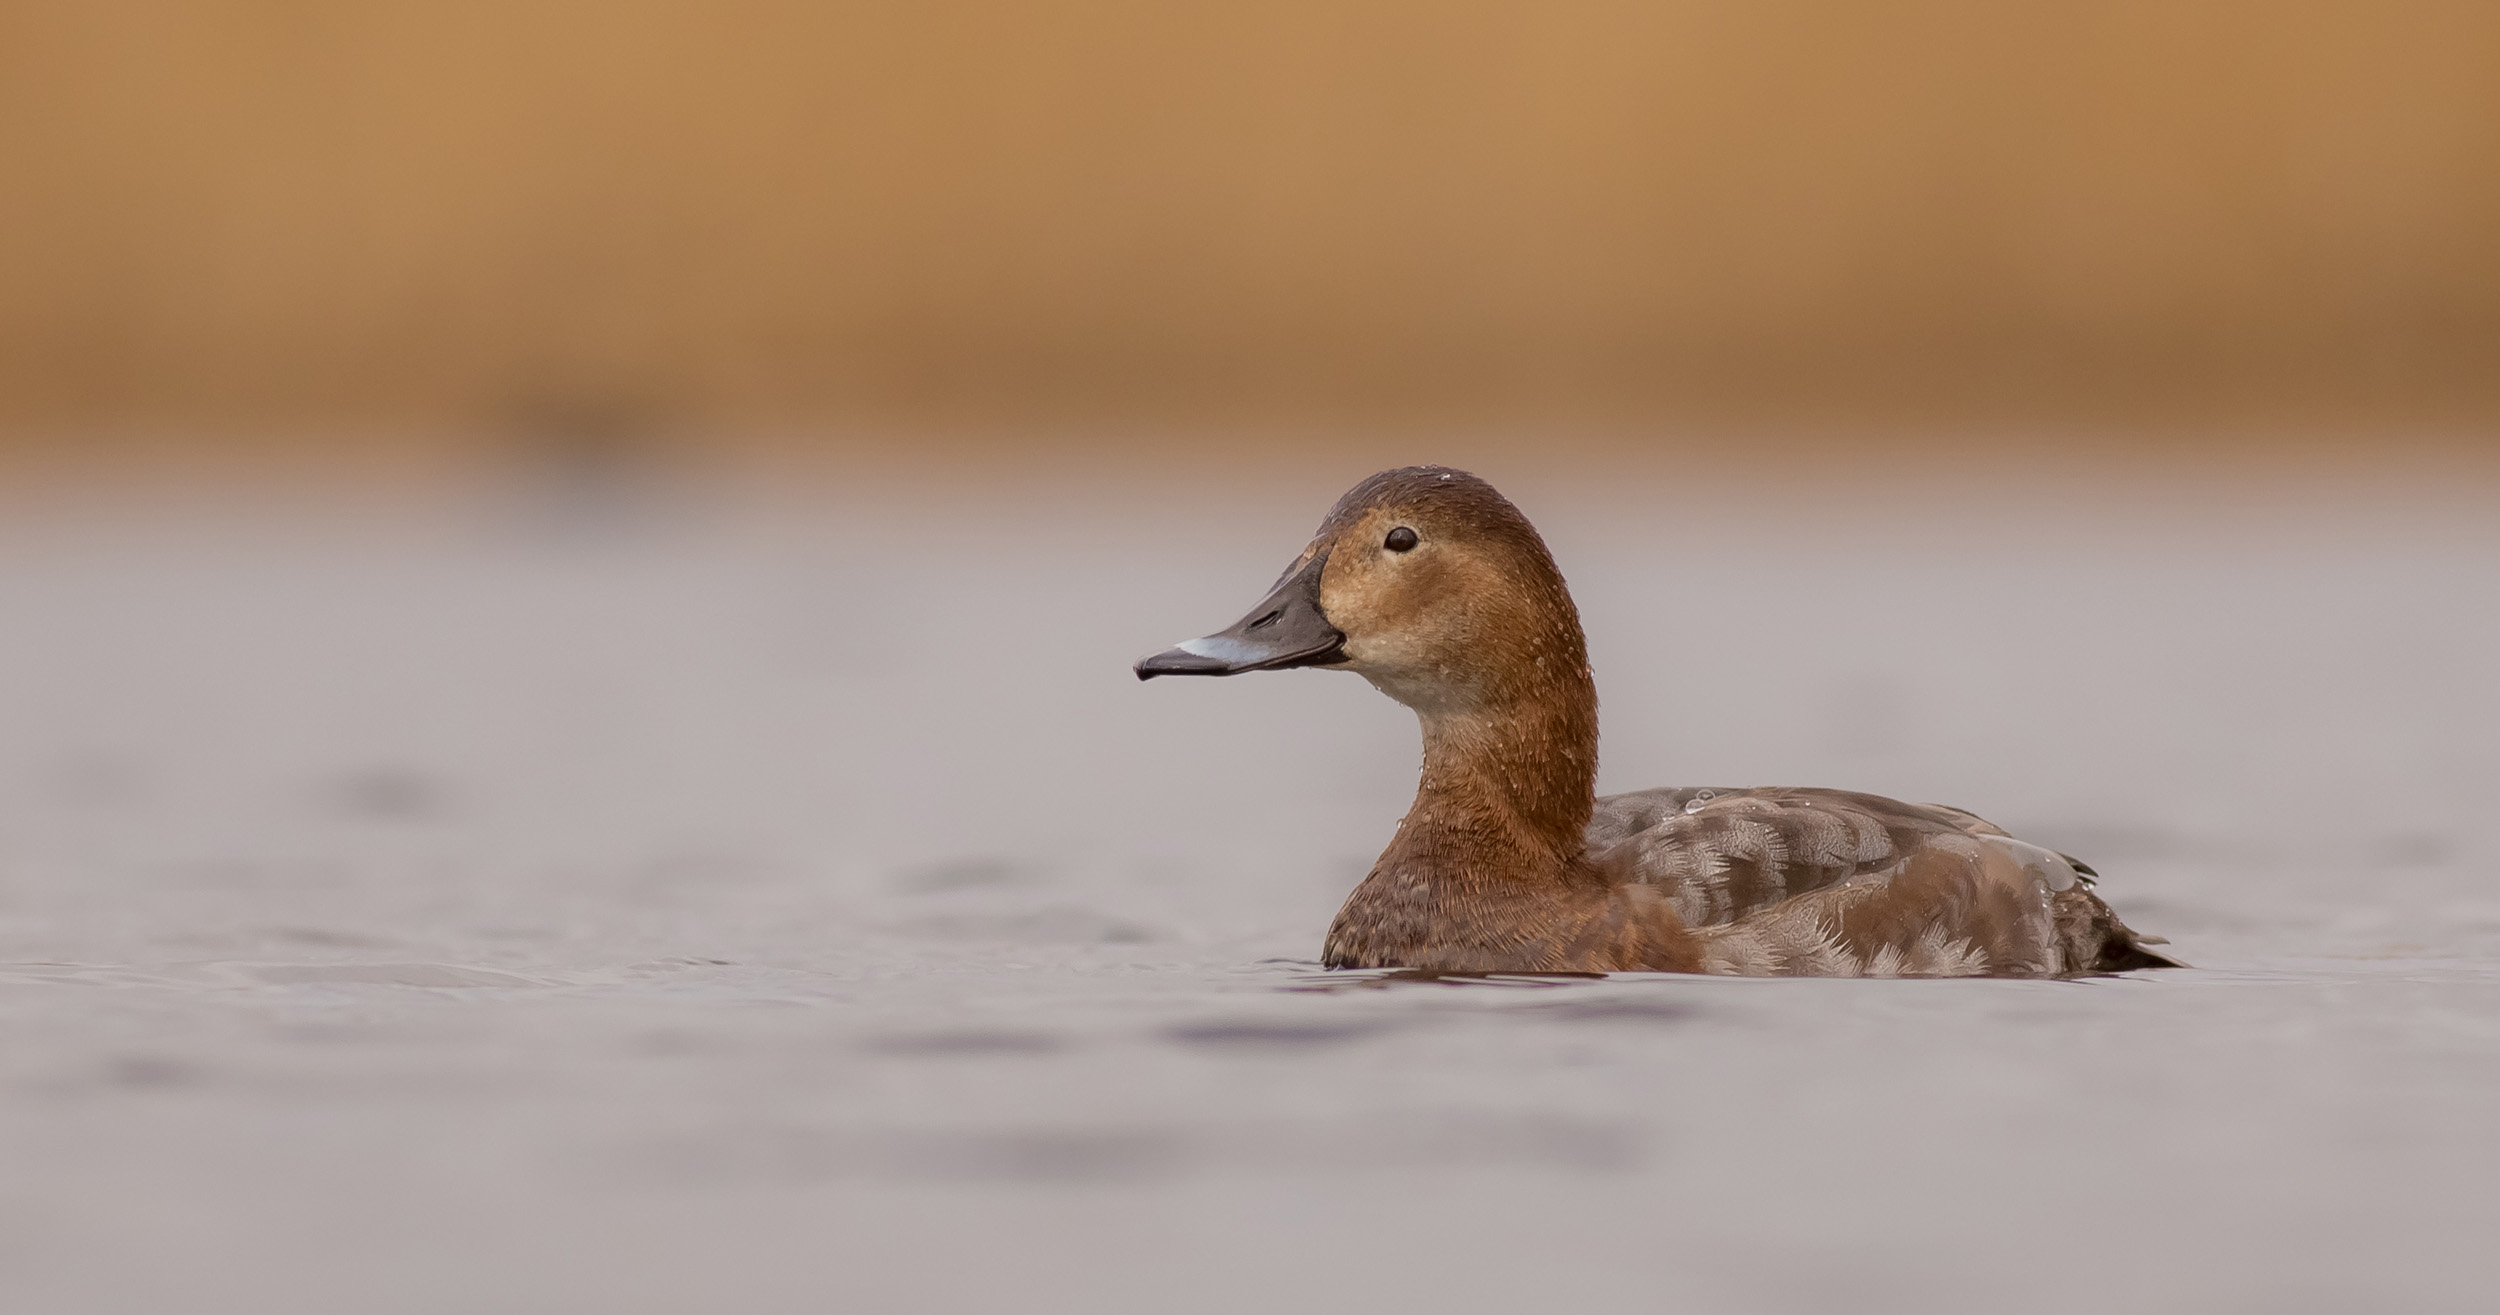 A female Common Pochard swimming on a body of water.